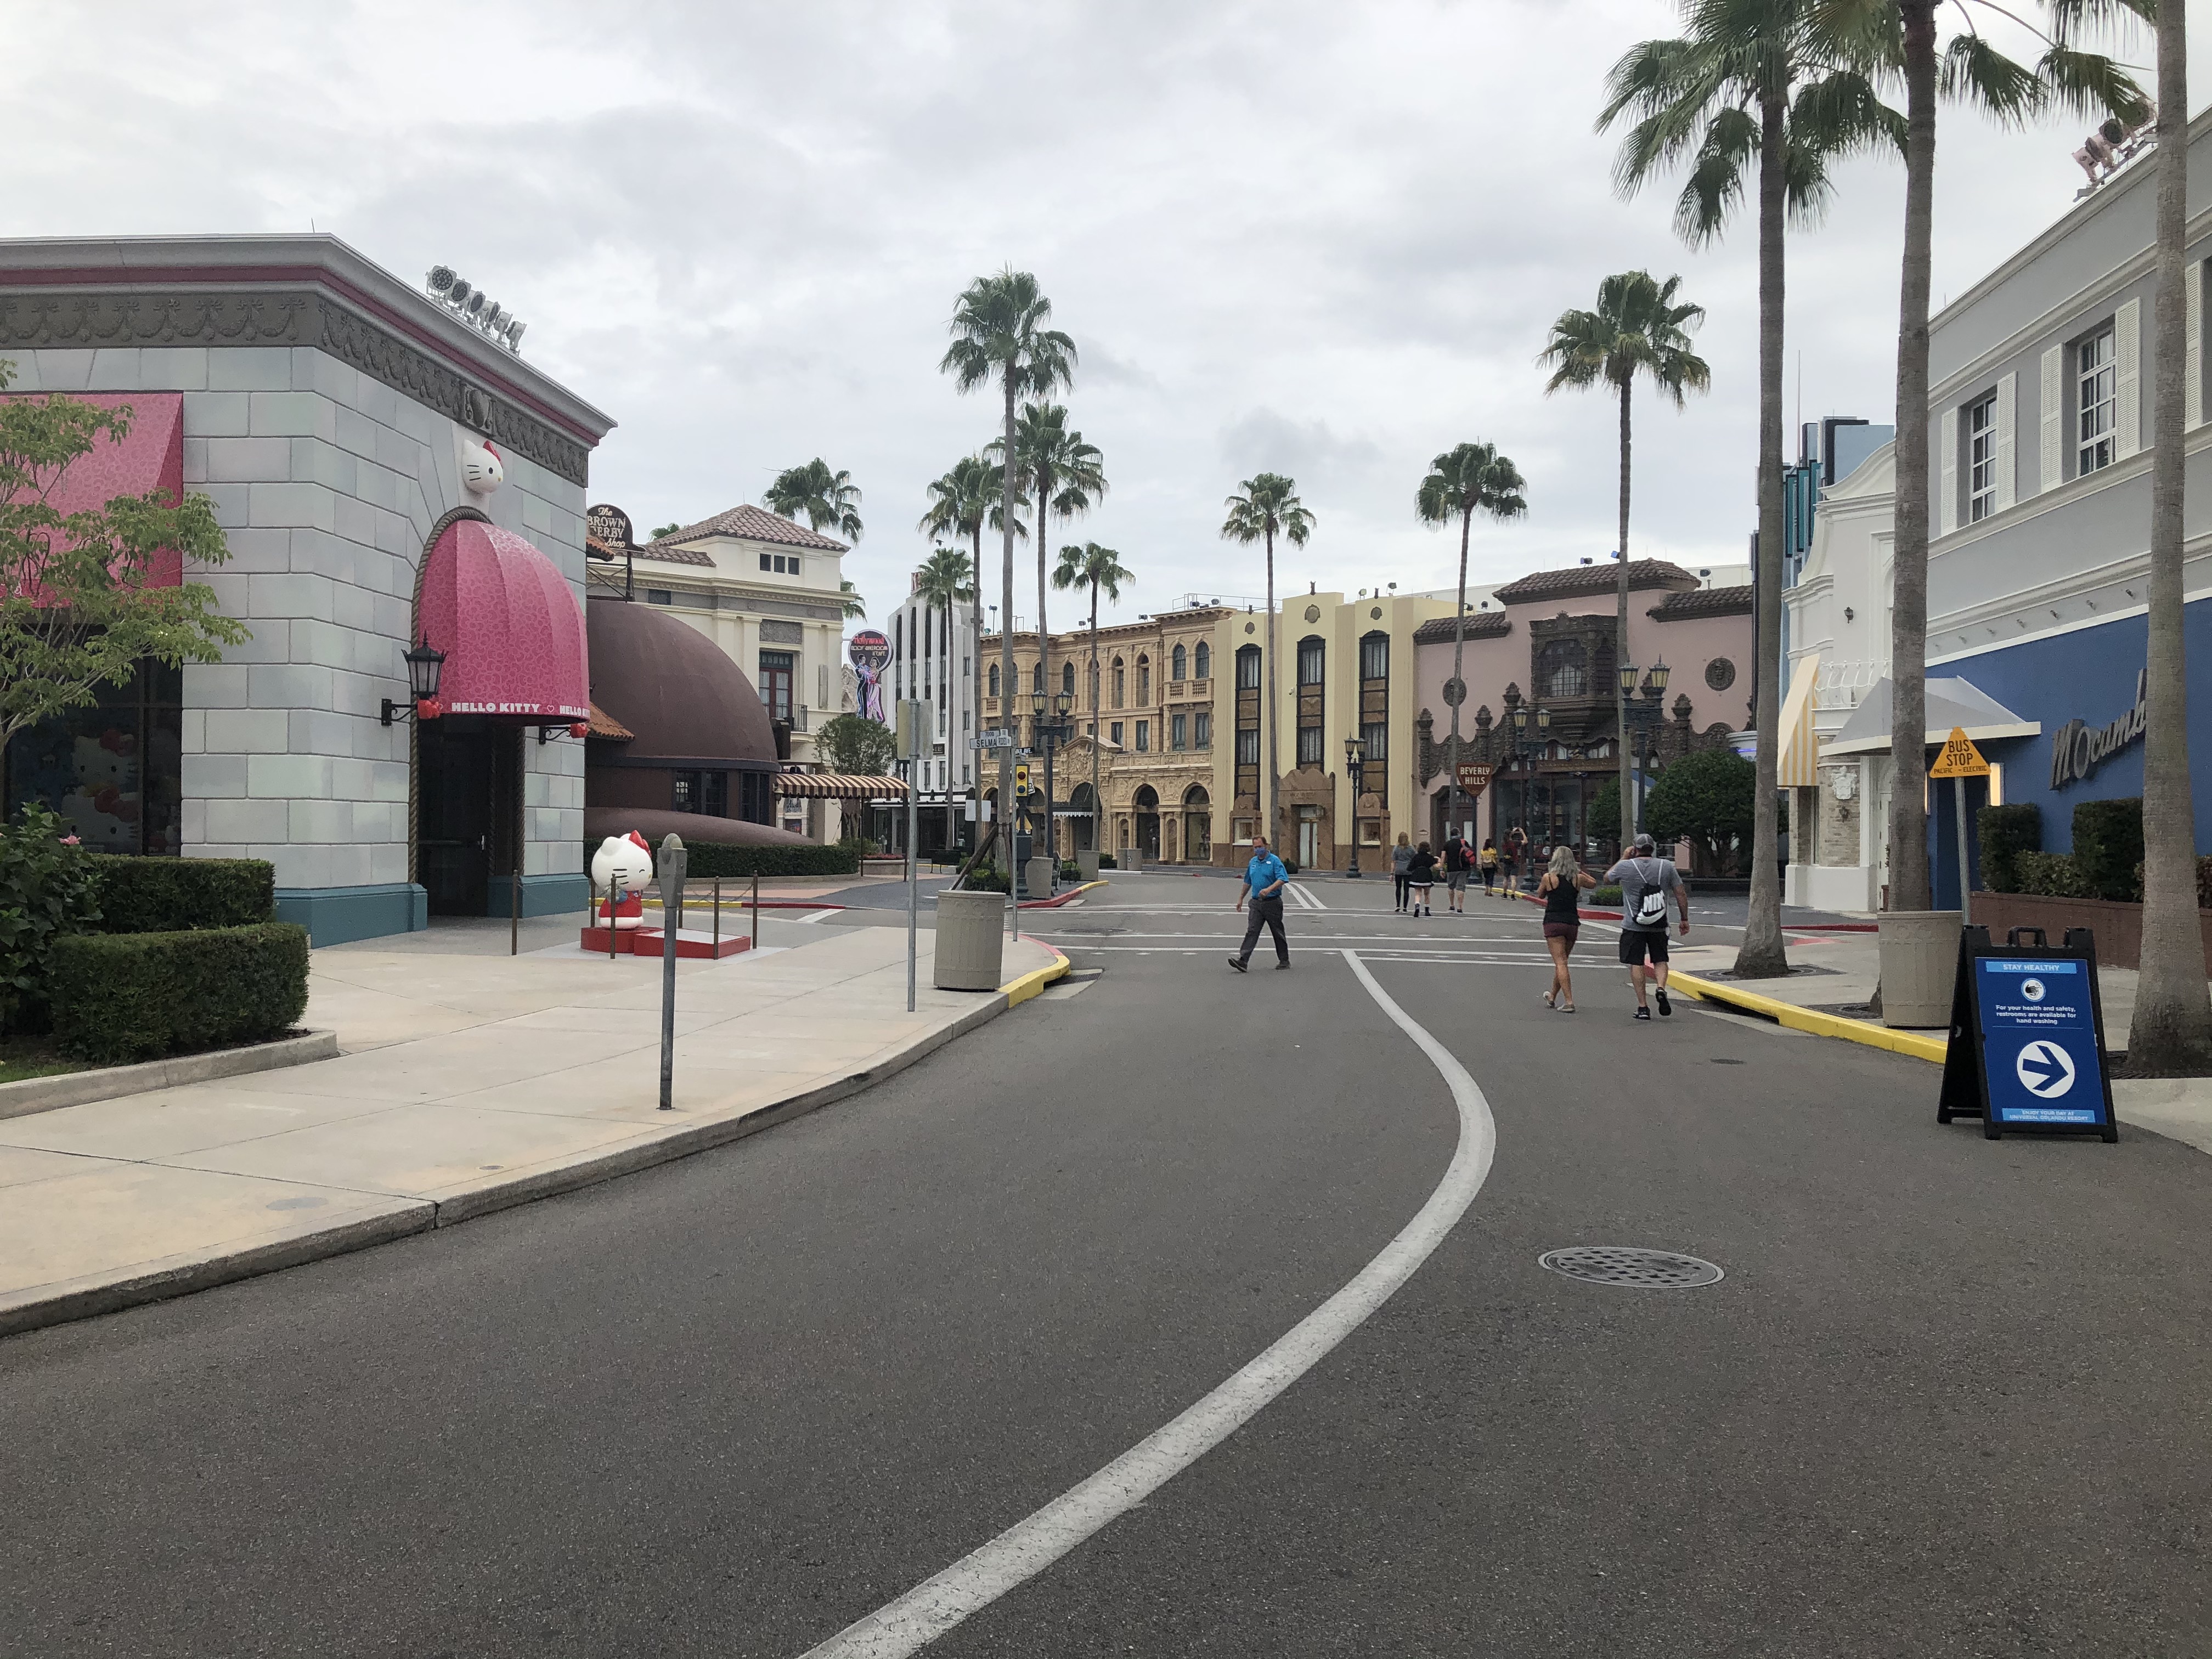 Entry area at Universal Studios